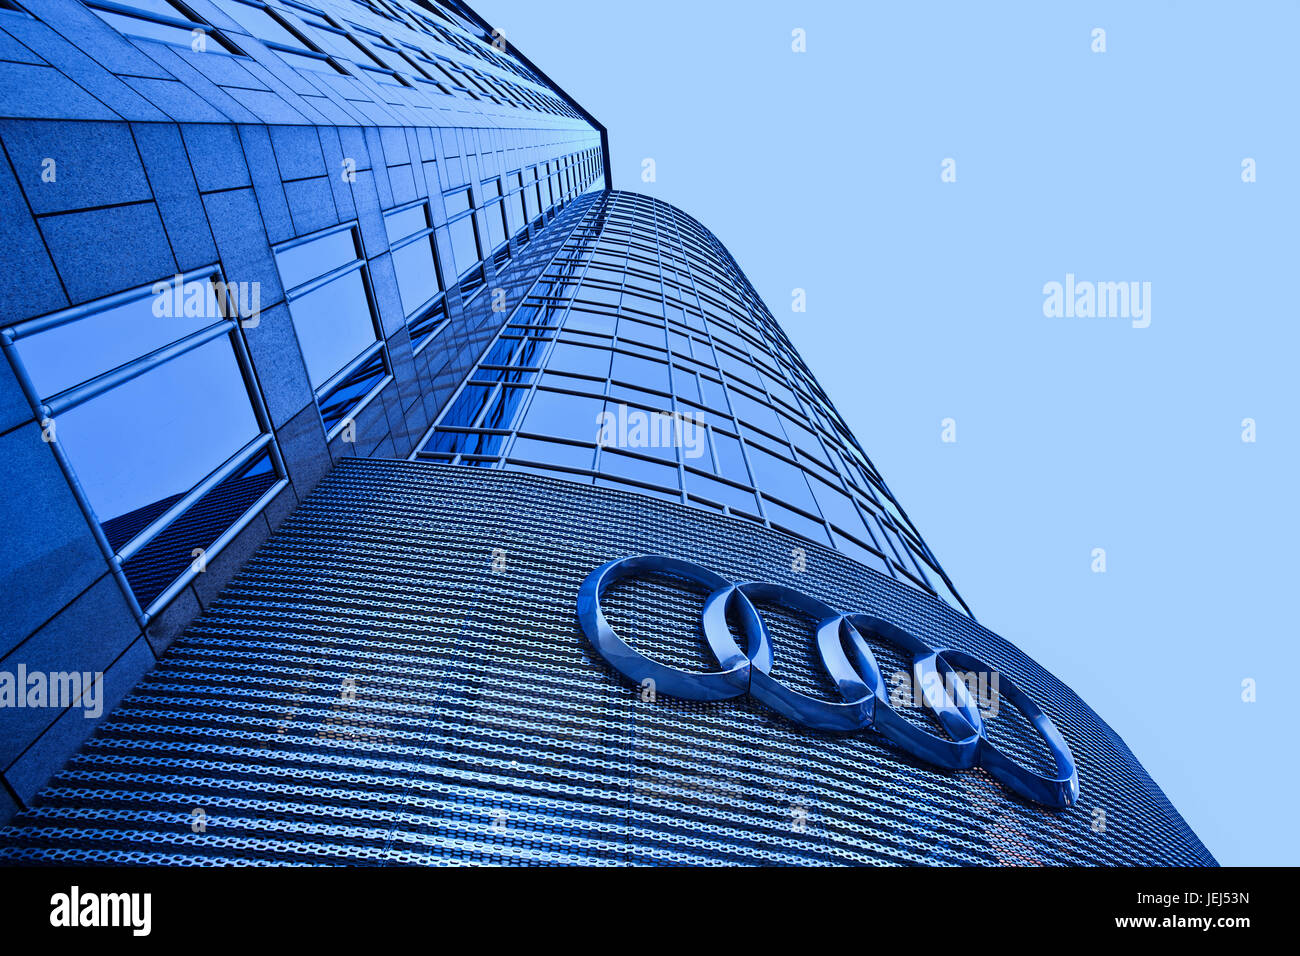 BEIJING-APRIL 17. Audi City Beijing. The 2,100 m2 exhibition space is a prestigious retail format especially developed for city-center locations. Stock Photo